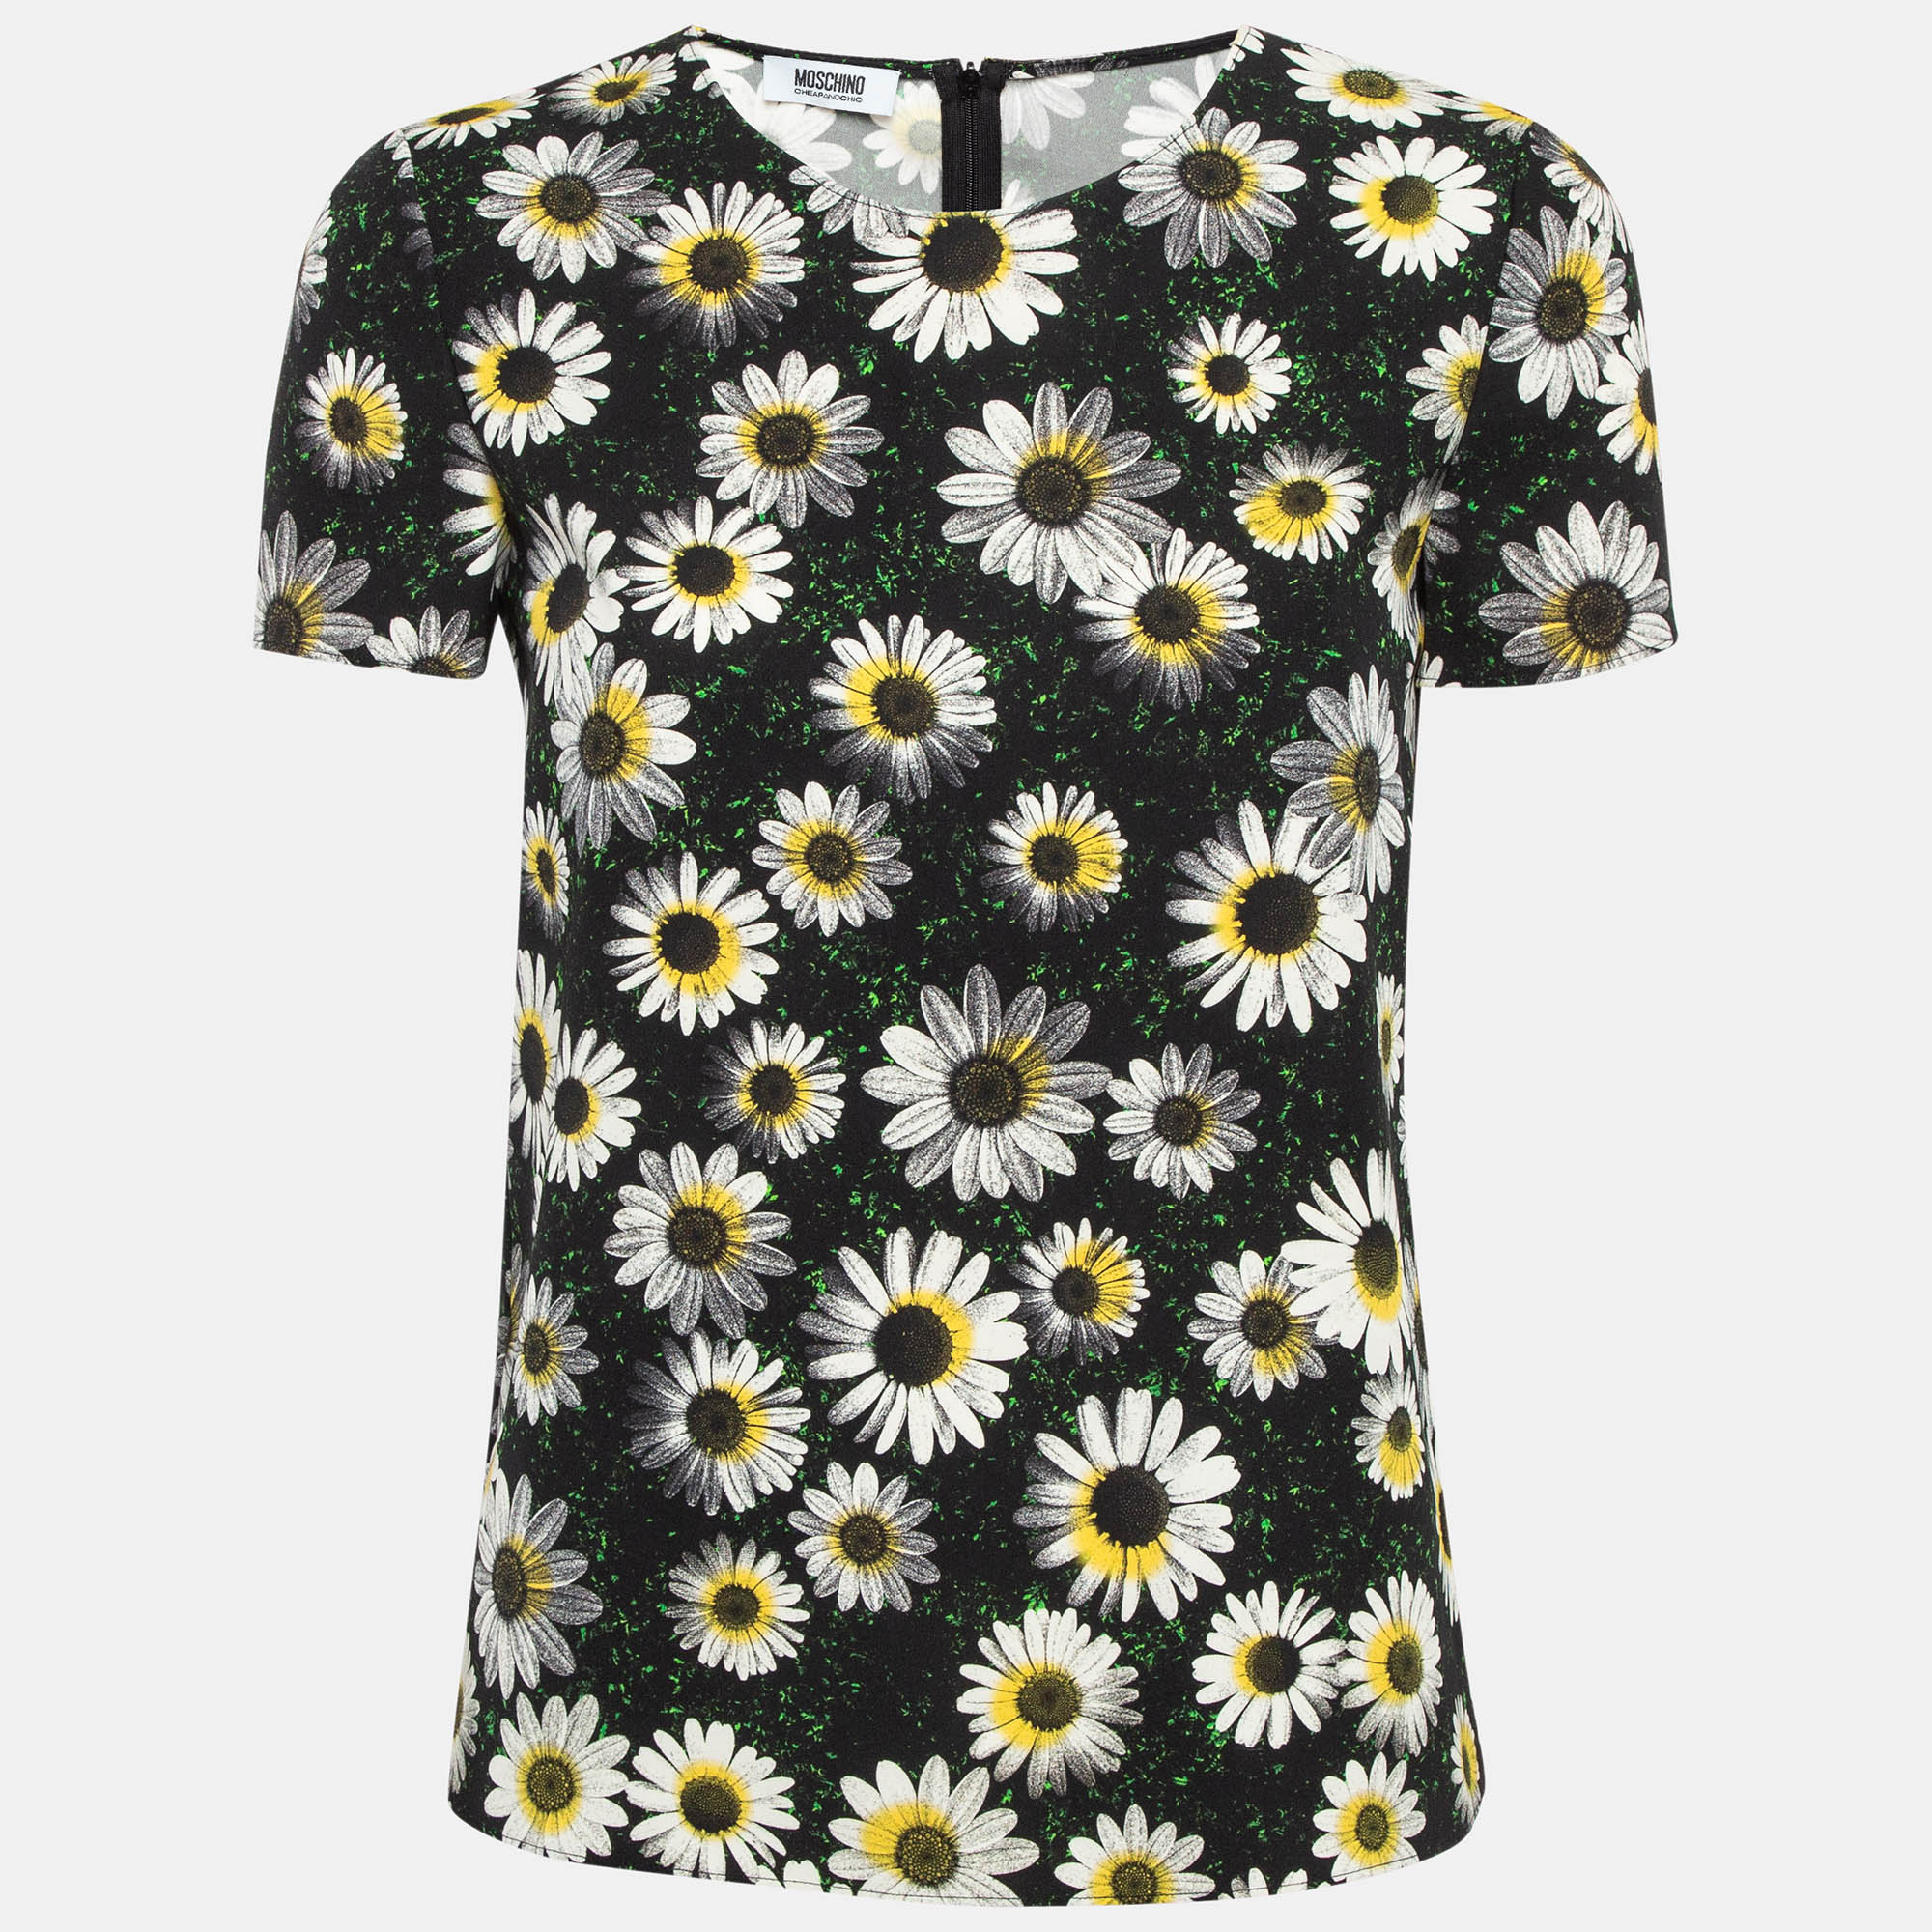 

Moschino Cheap and Chic Black Floral Printed Crepe Top S